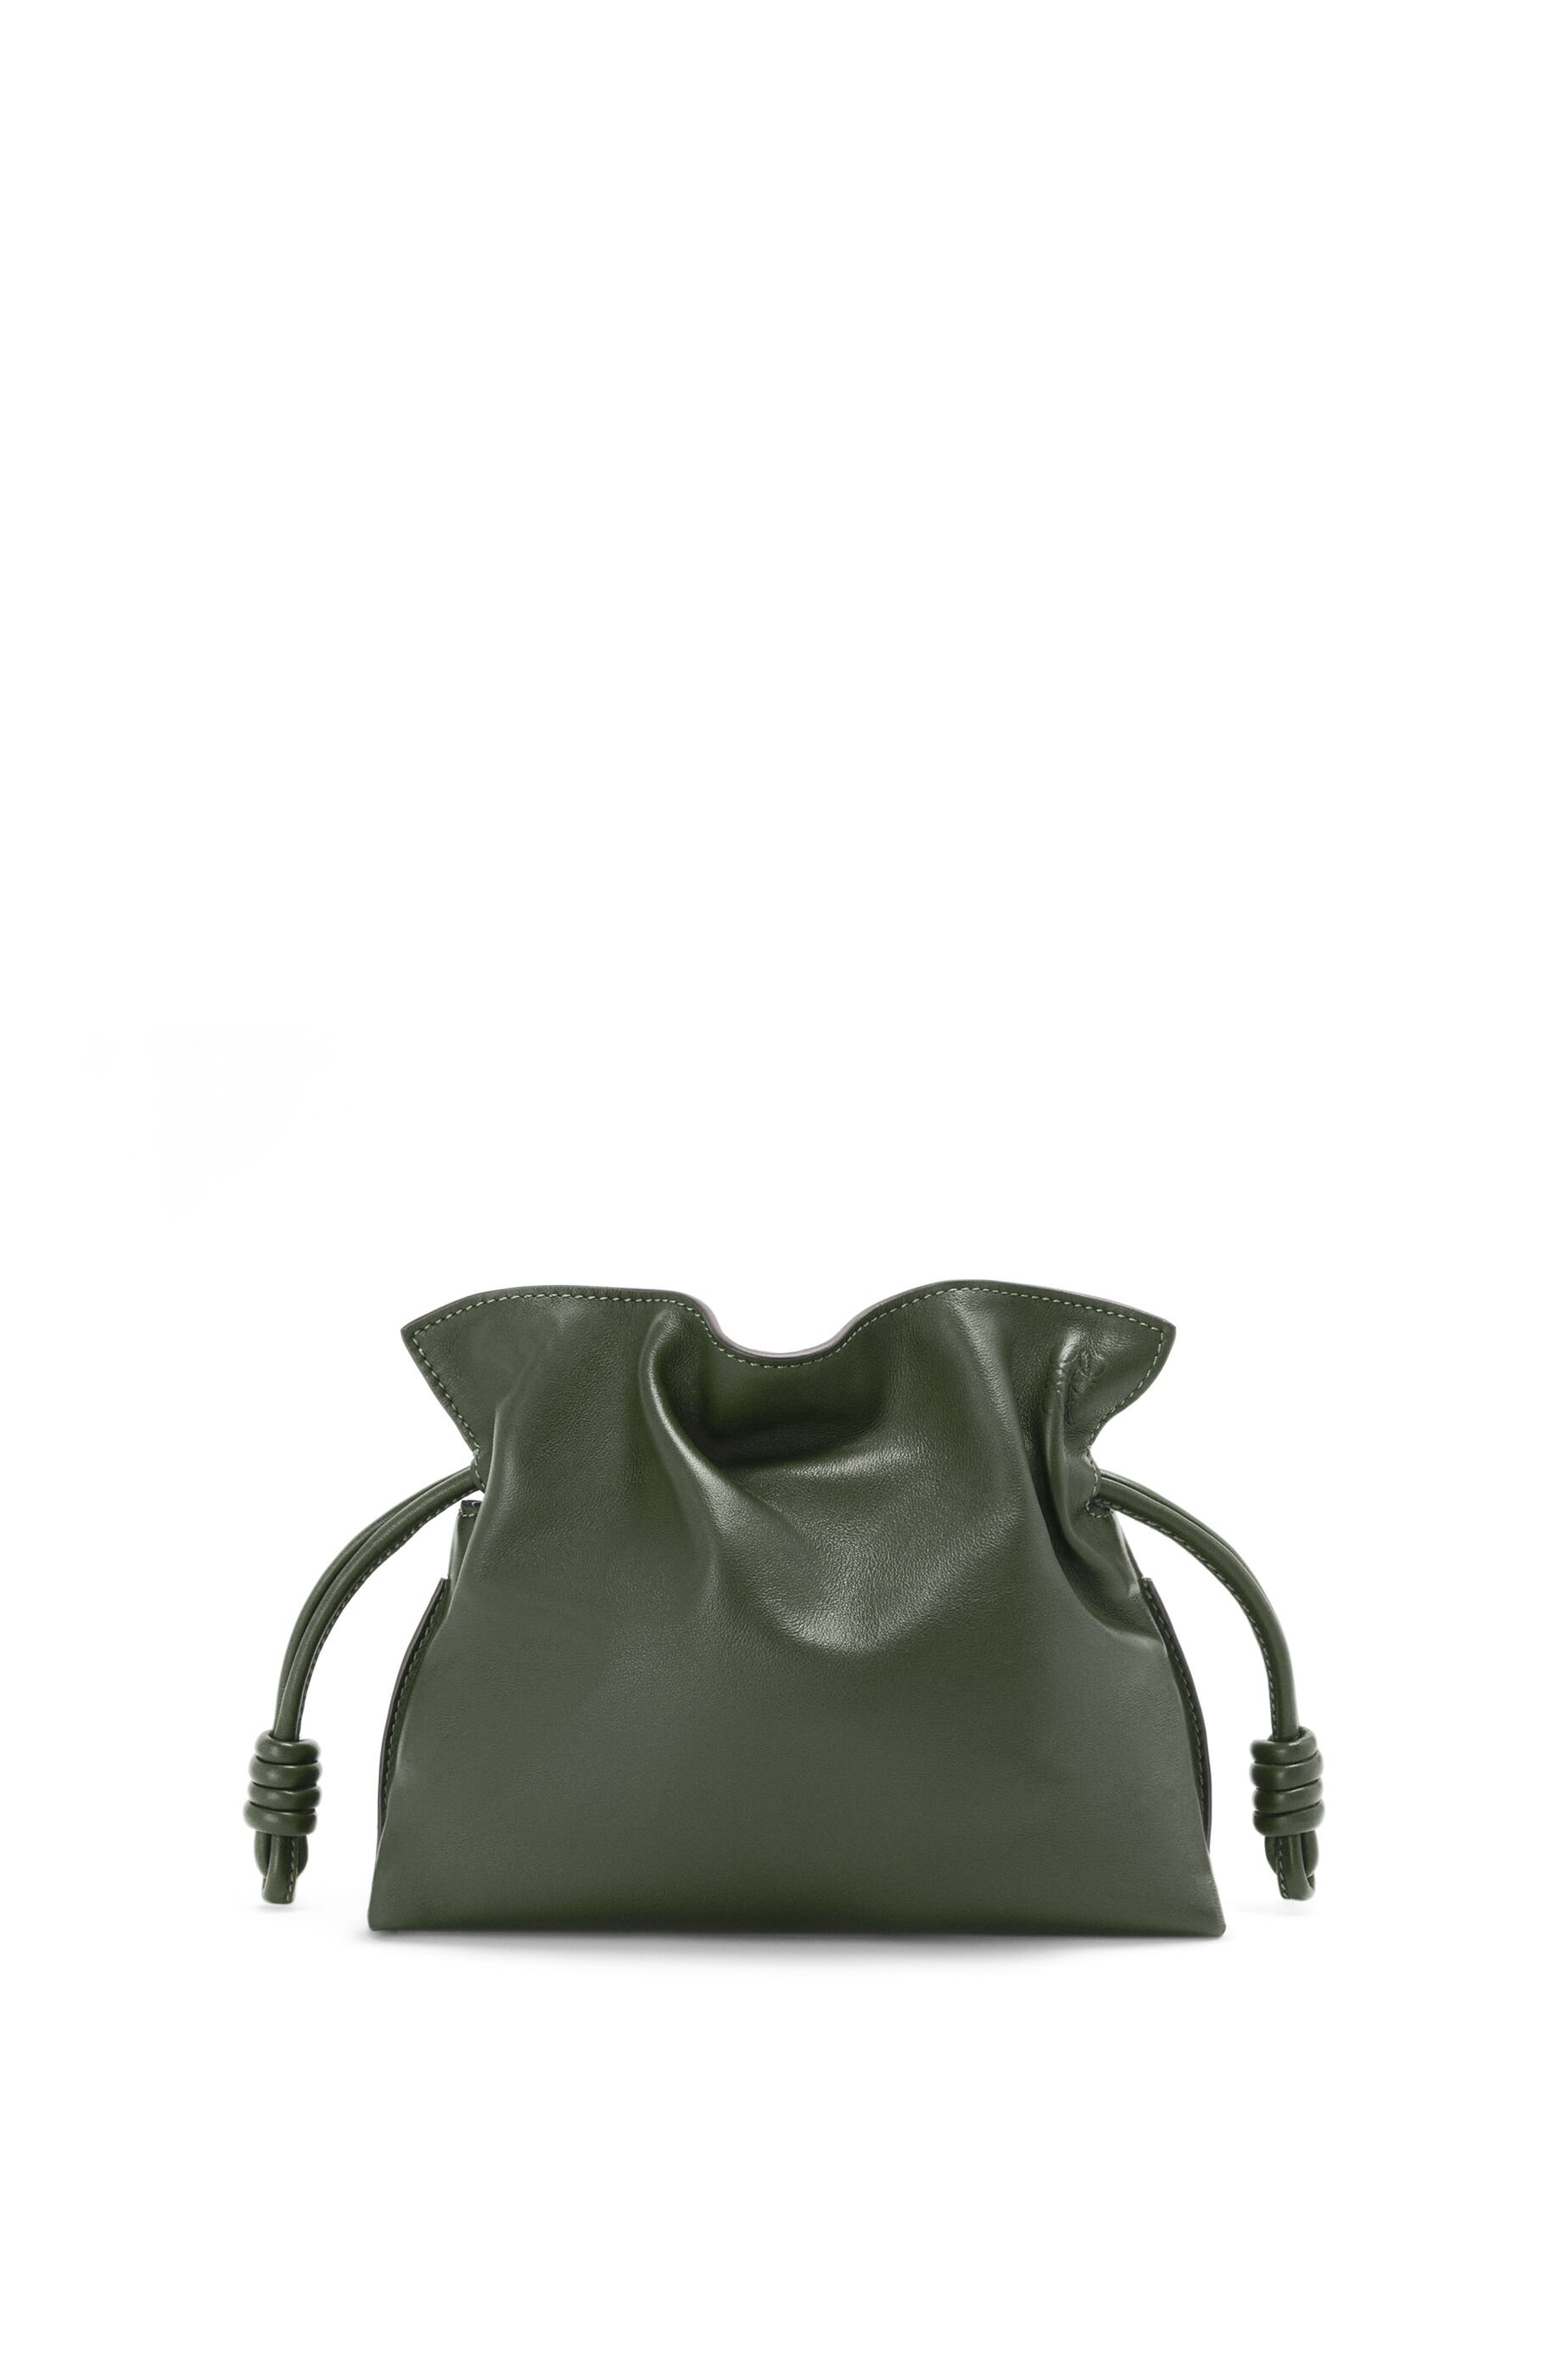 Luxury Flamenco Bags for women | See our Collection | Loewe - LOEWE